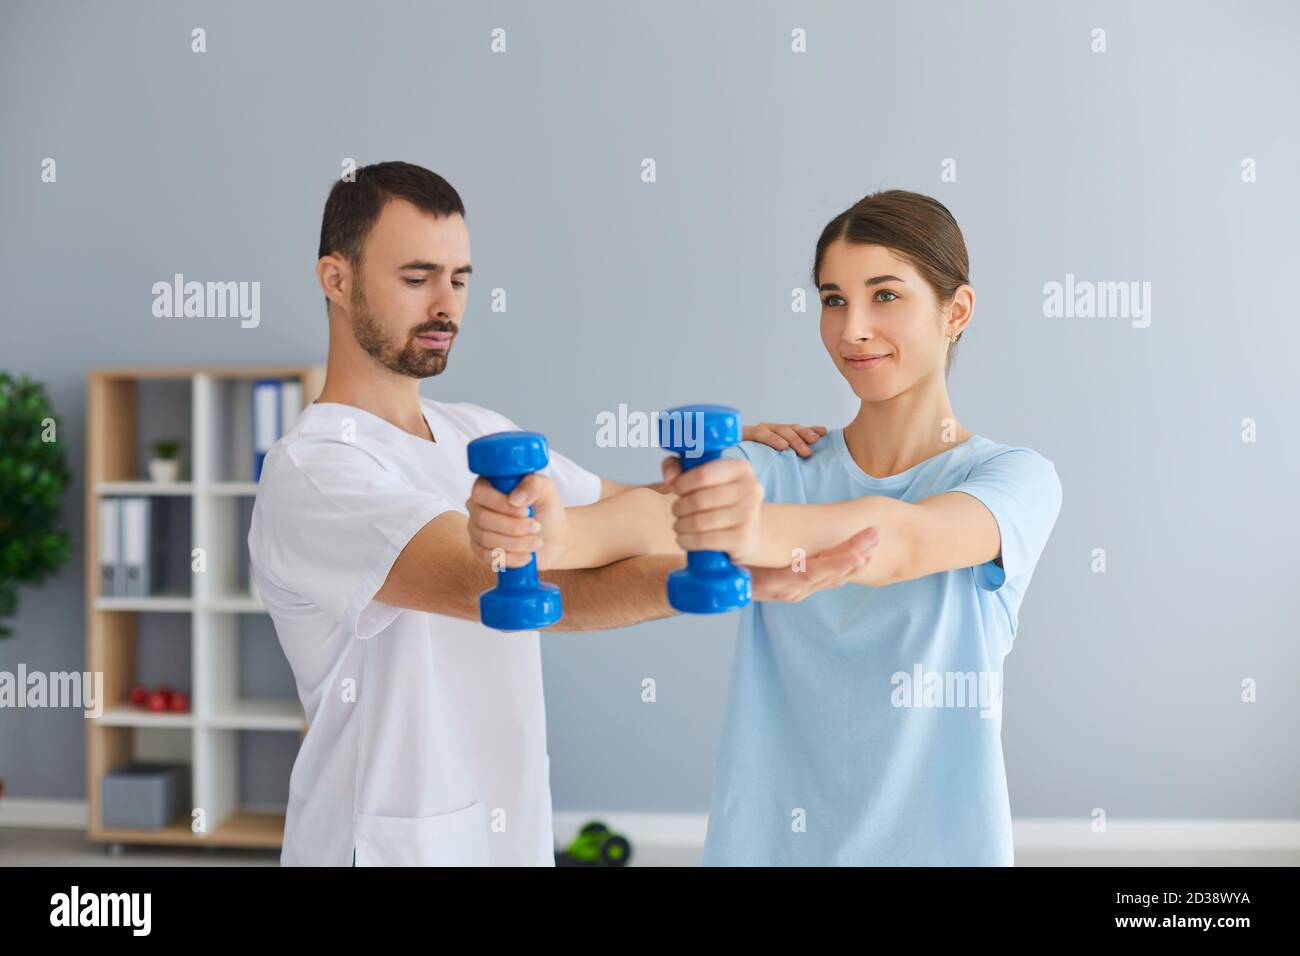 Chiropractor or osteopath fixing woman patient with dumbbels in right position for pain relief Stock Photo